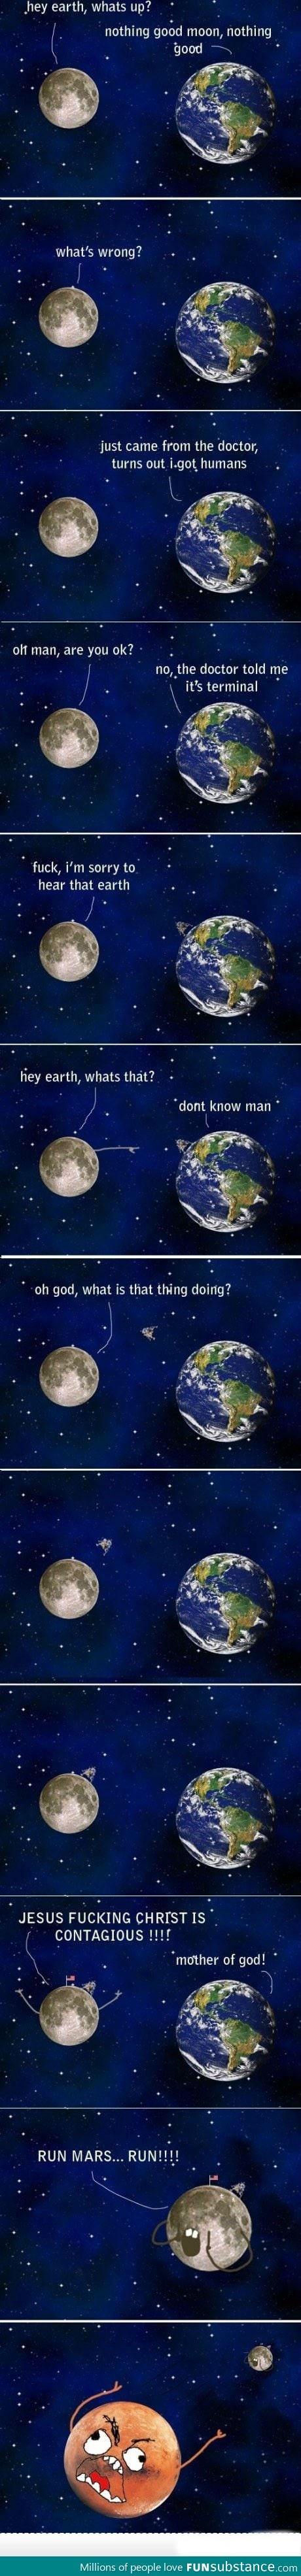 Hey Earth, what's wrong?